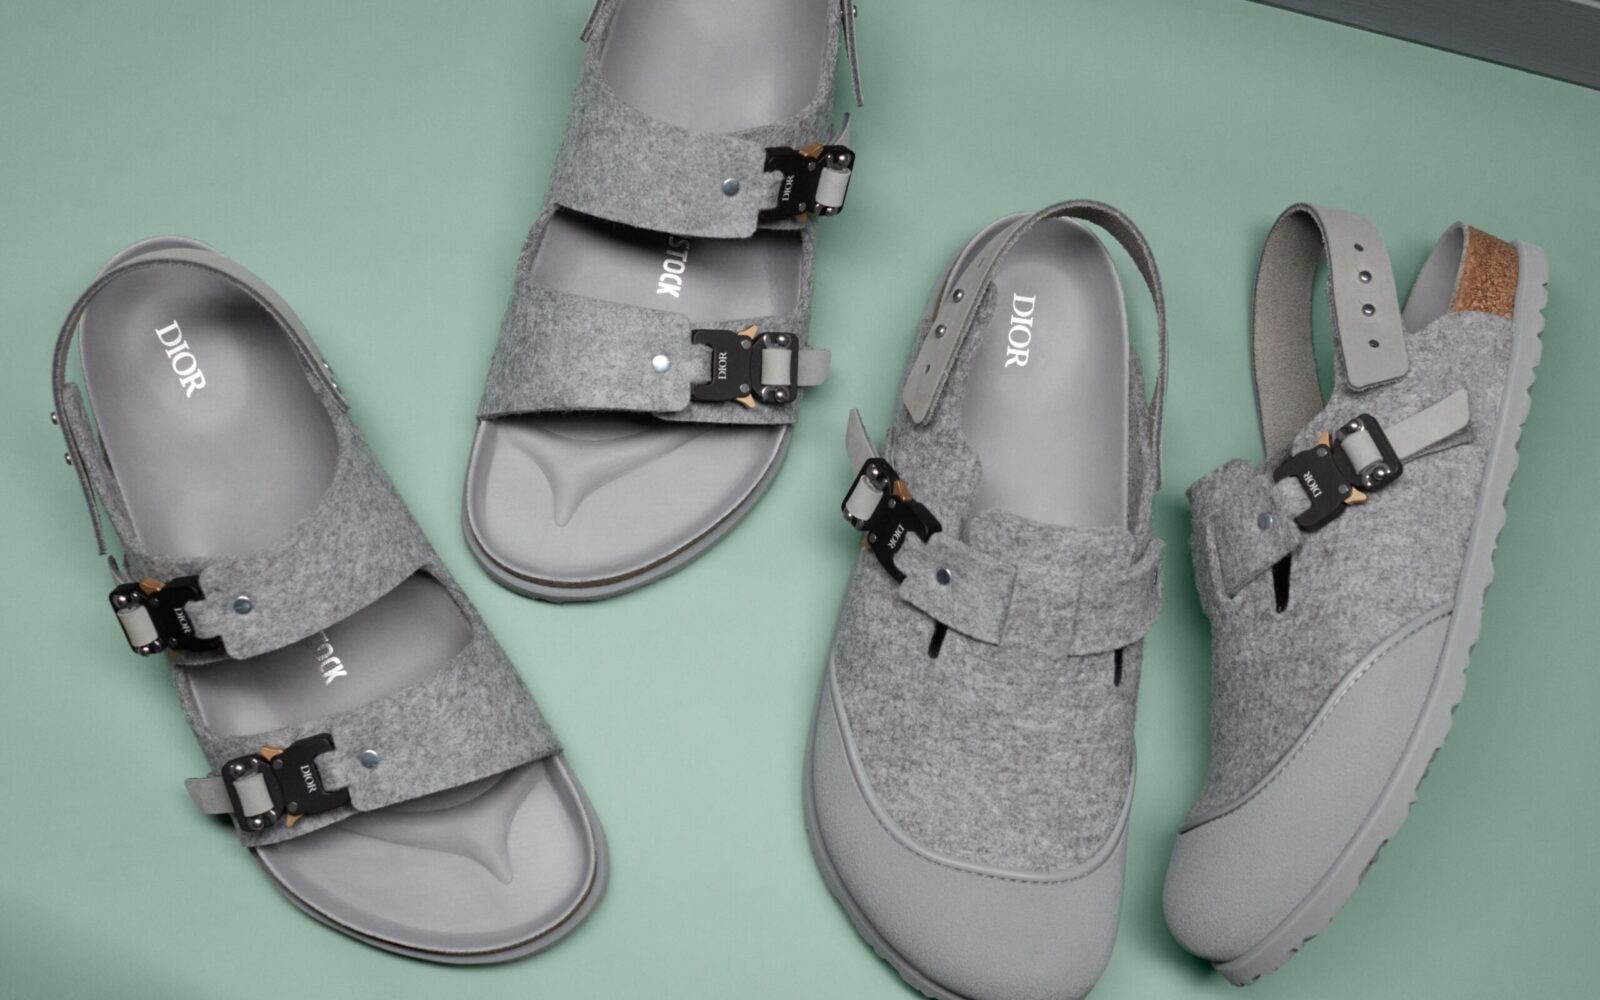 The Dior x Birkenstock collection